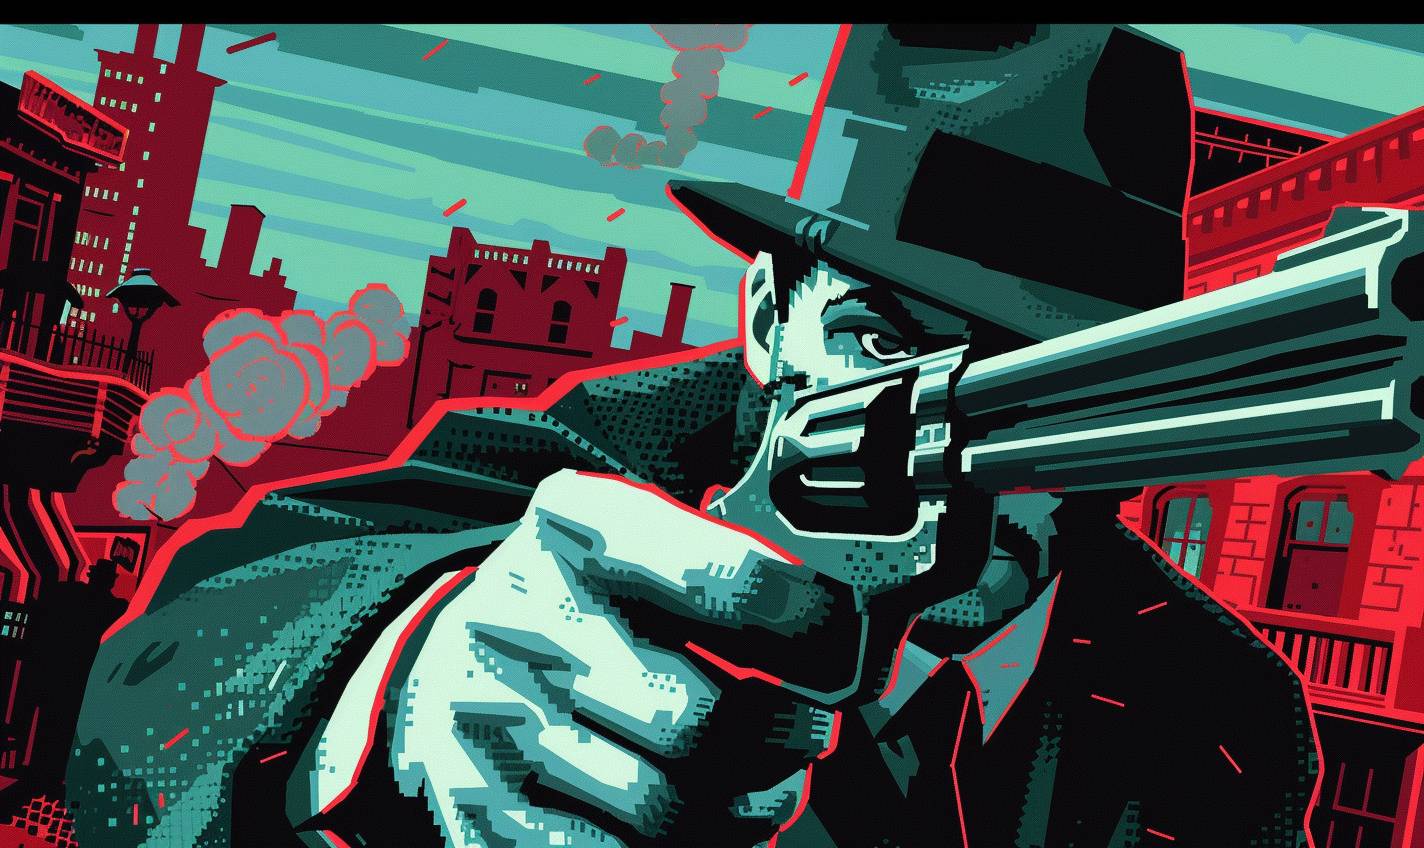 8-bit pixel art close-up of a ruthless gangster with a fedora holding a tommy gun looking at the camera in front of a speakeasy, with a 1920s city background, using flat colors, simple shapes, video game design style with a dark palette, high contrast, pixelation, and low resolution, gritty textures, dynamic action pose, pixel art face and close-up view